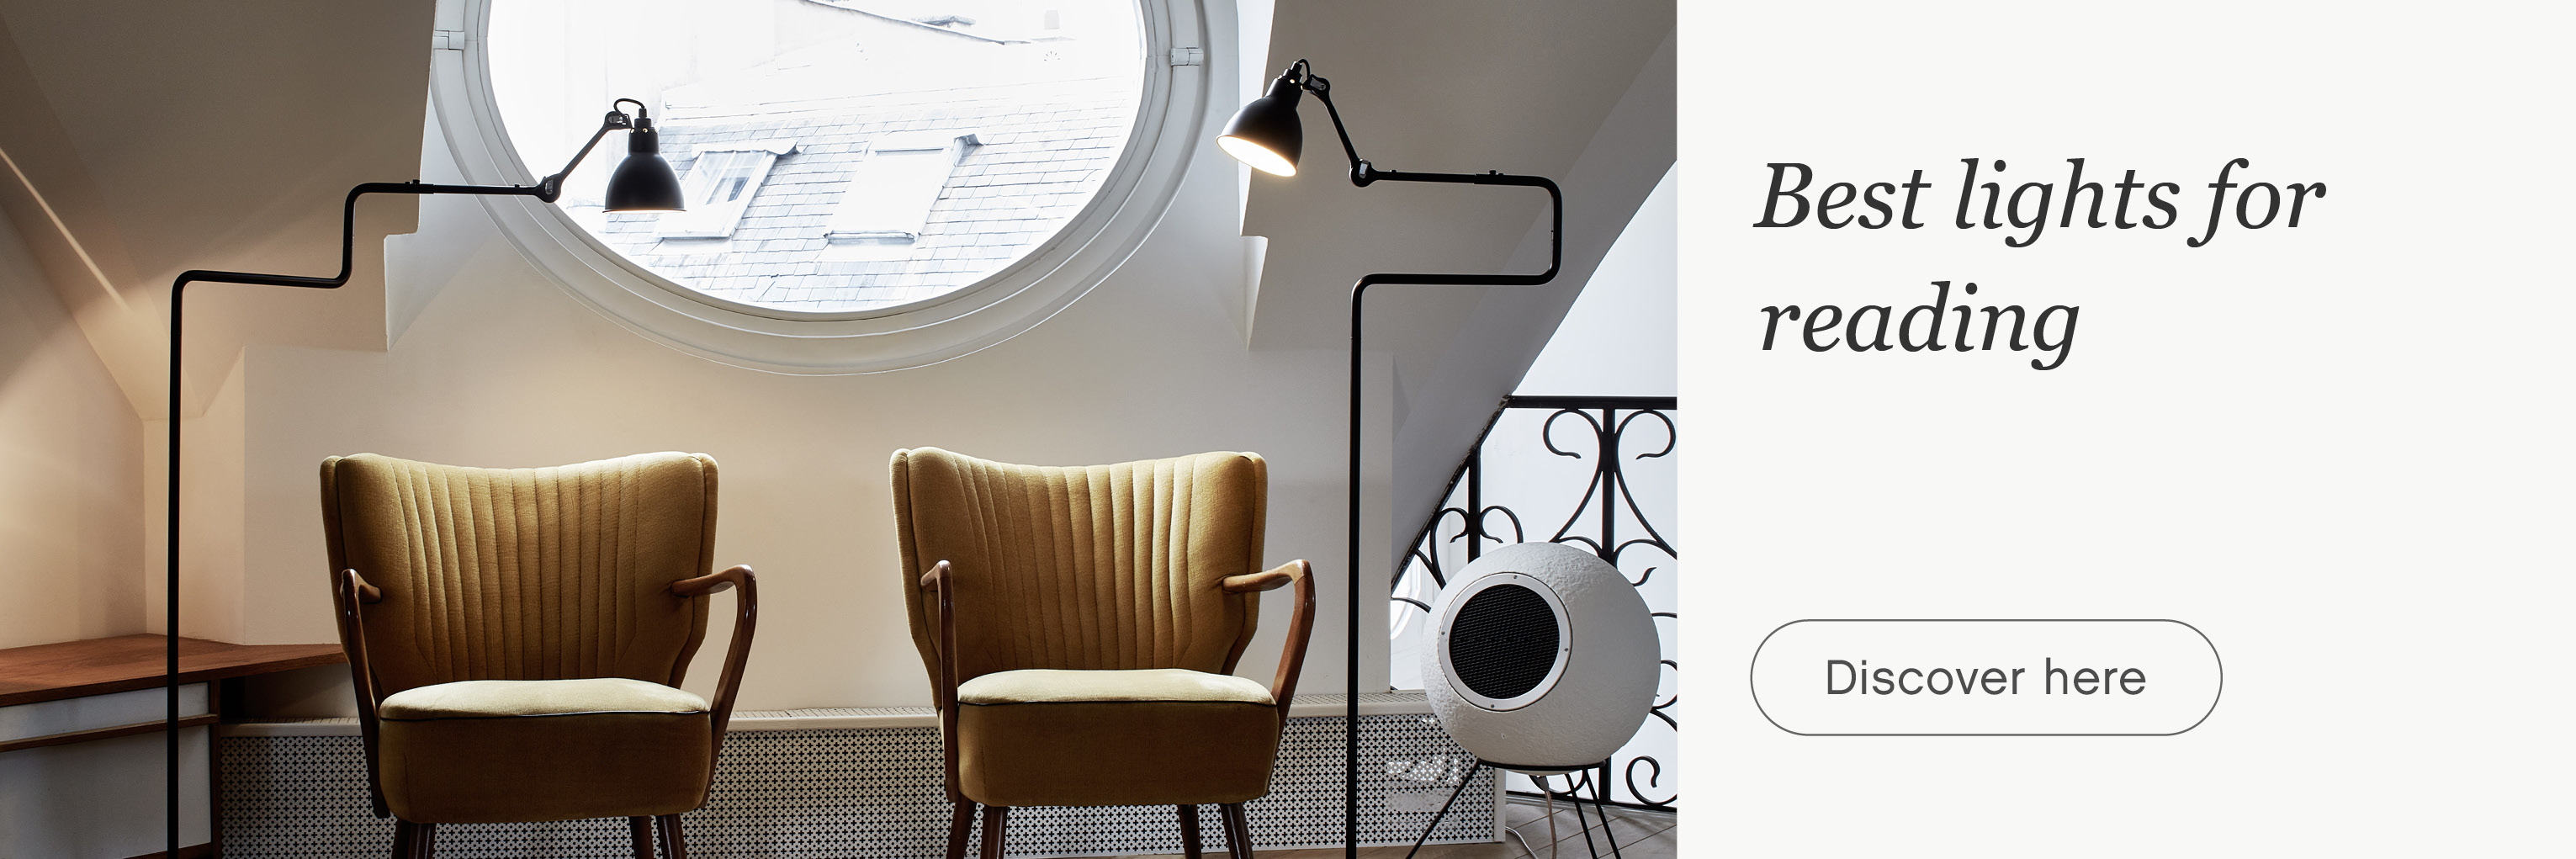 Two reading floor lamps